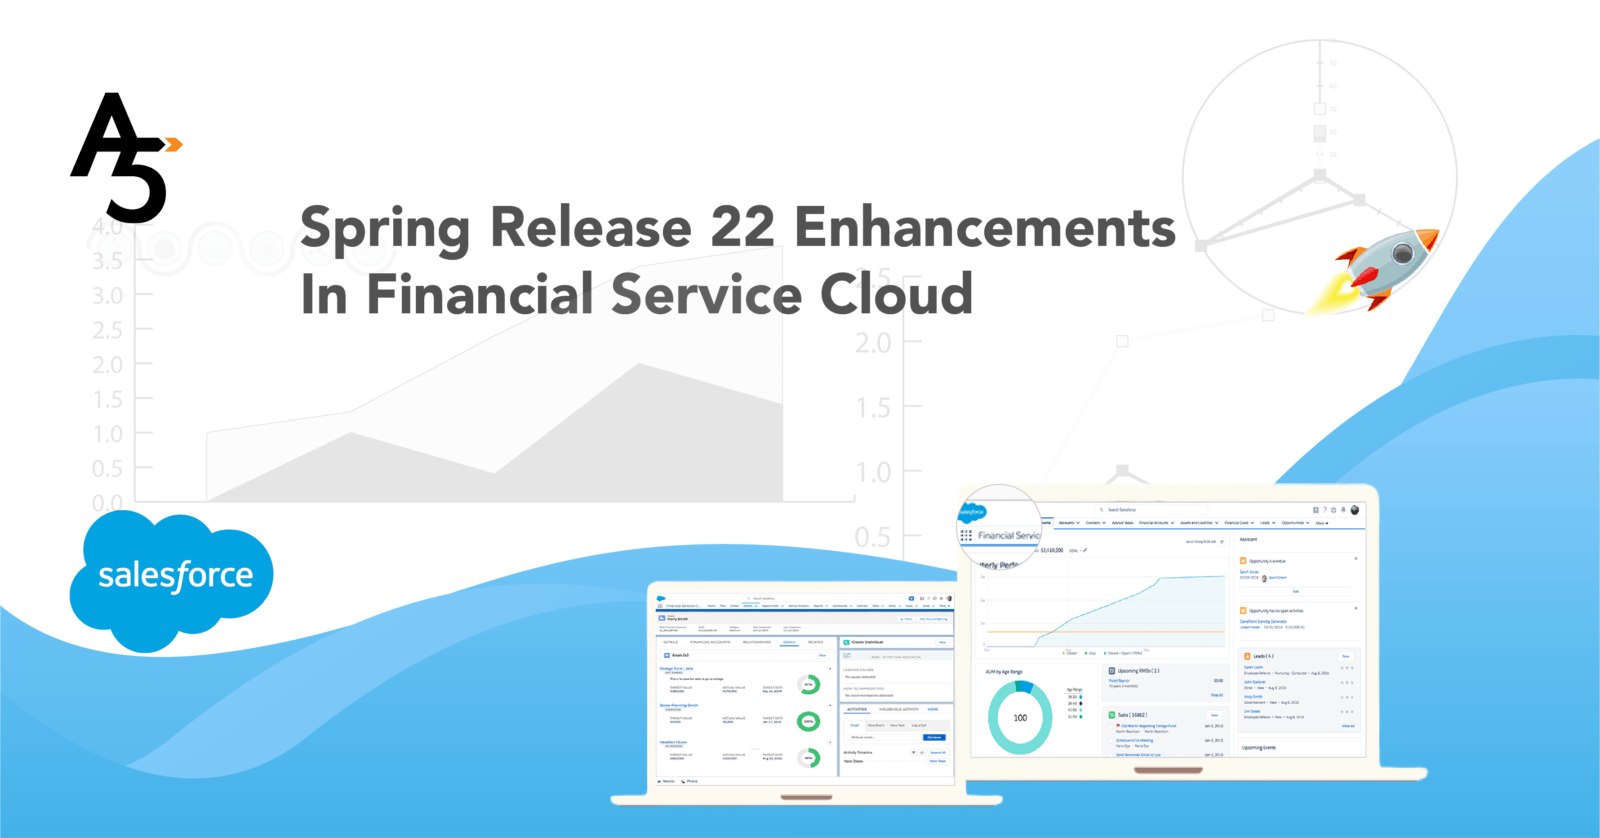 Spring Release 22 Enhancements In Financial Service Cloud